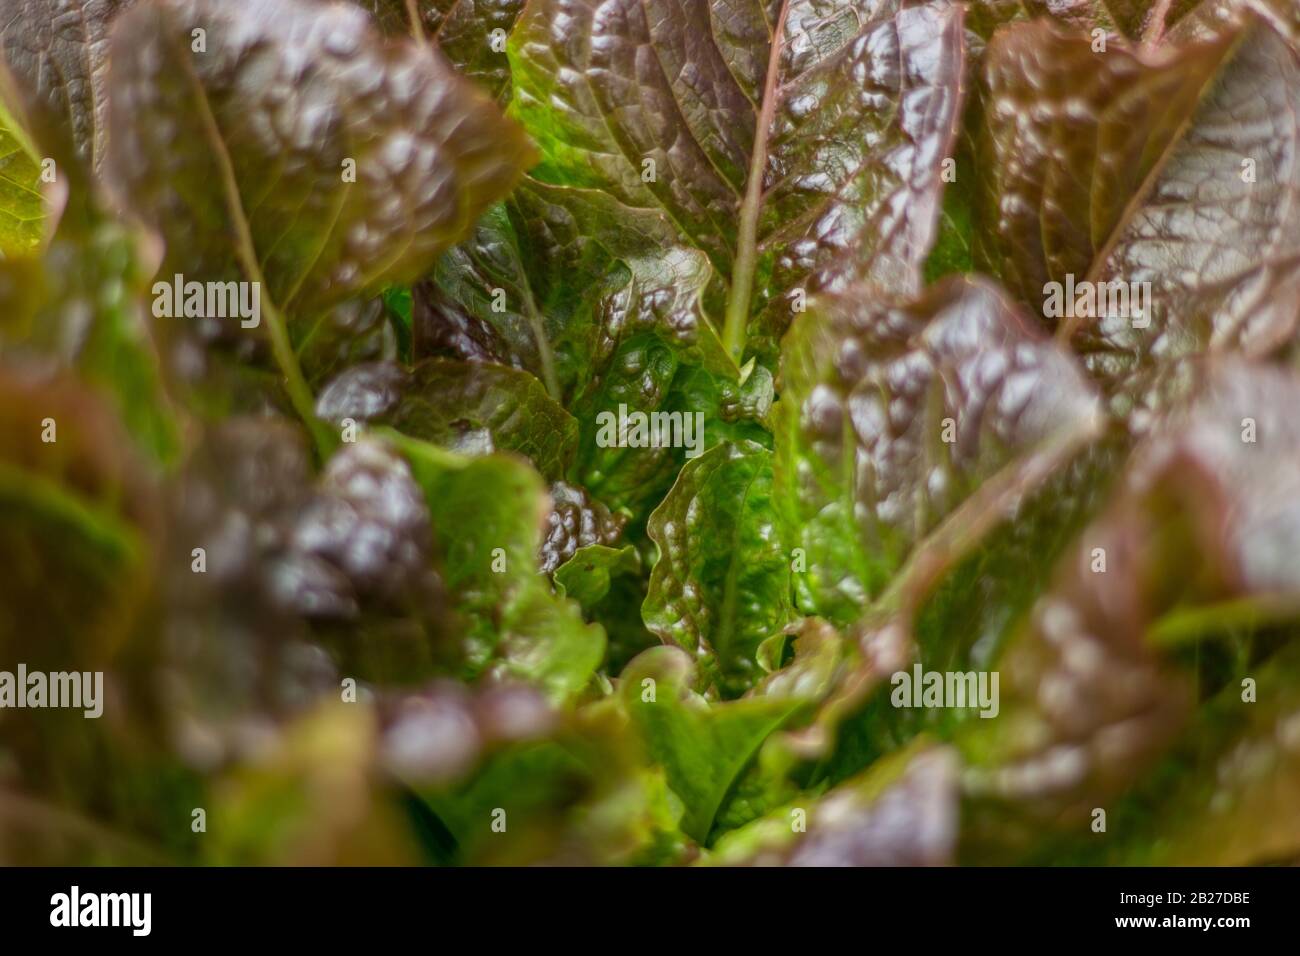 The organic cultivation of lettuce Stock Photo